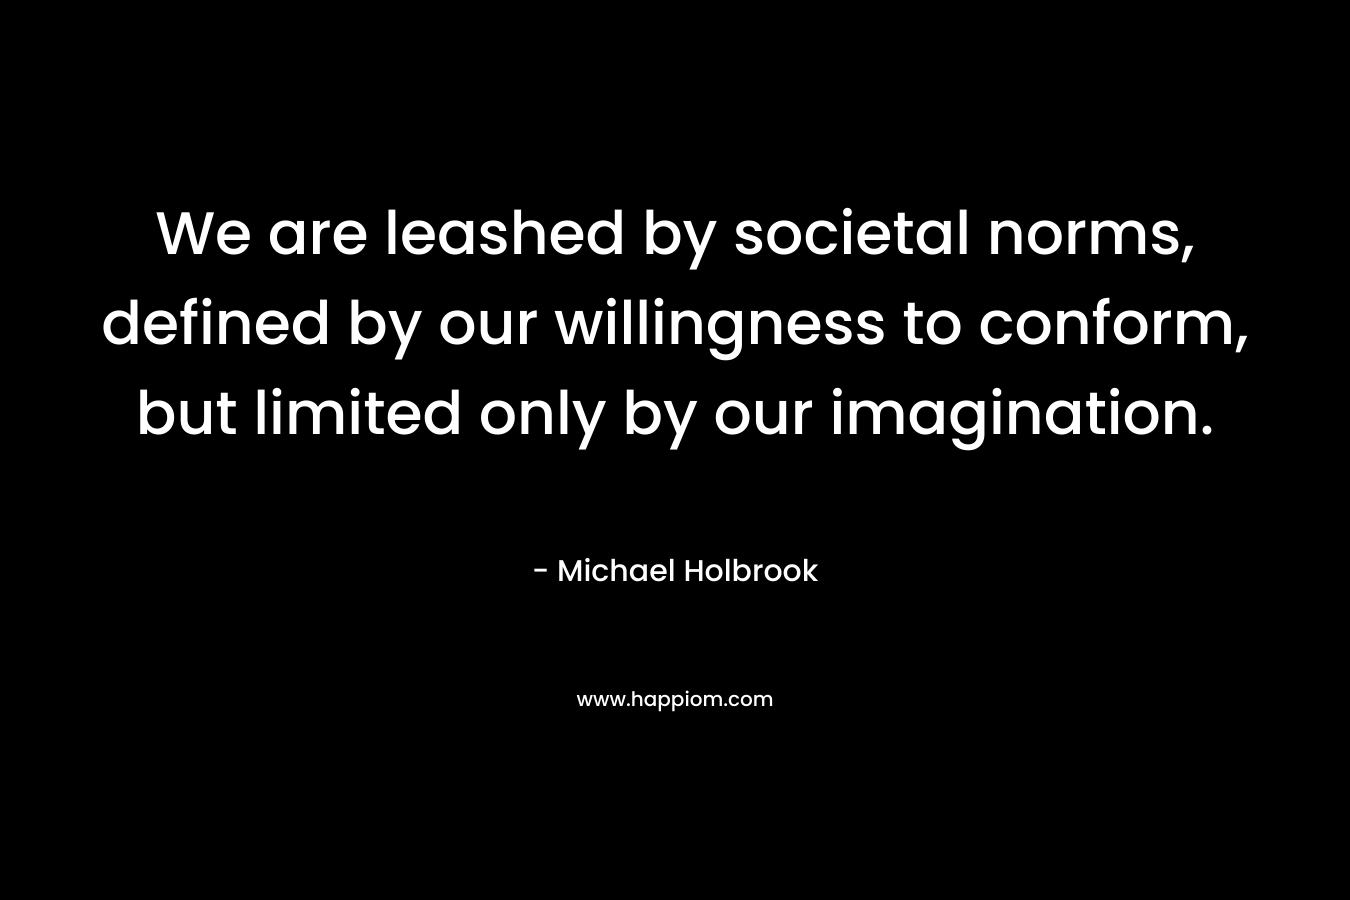 We are leashed by societal norms, defined by our willingness to conform, but limited only by our imagination.